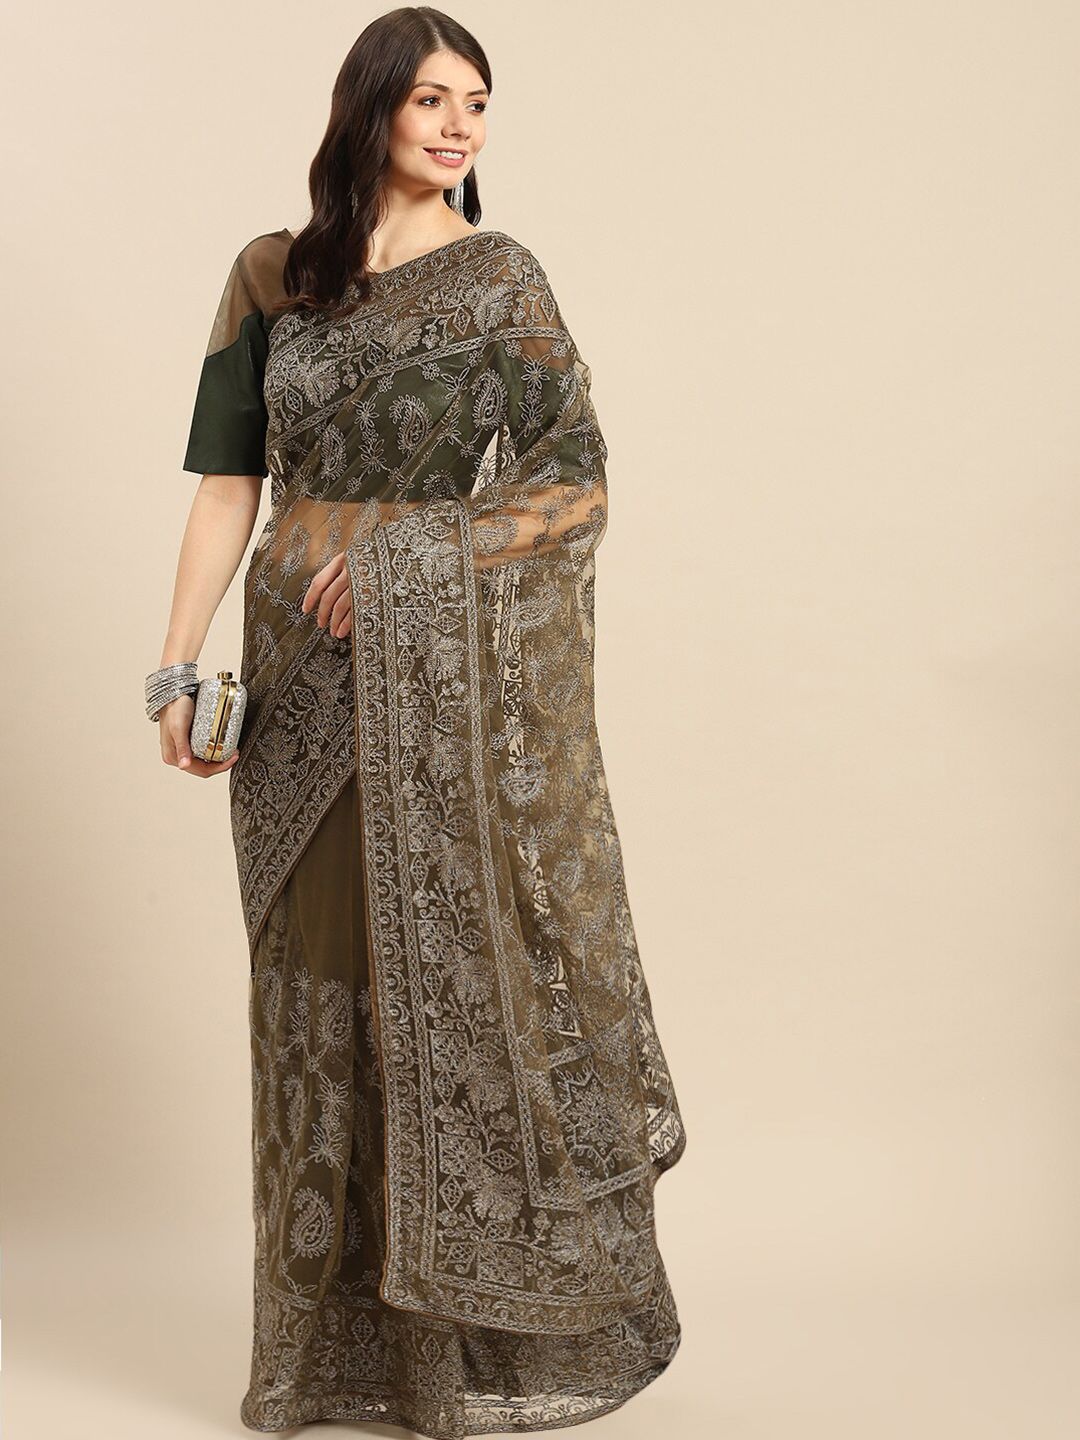 all about you Olive Green Paisley Beads and Stones Net Mangalagiri Saree Price in India